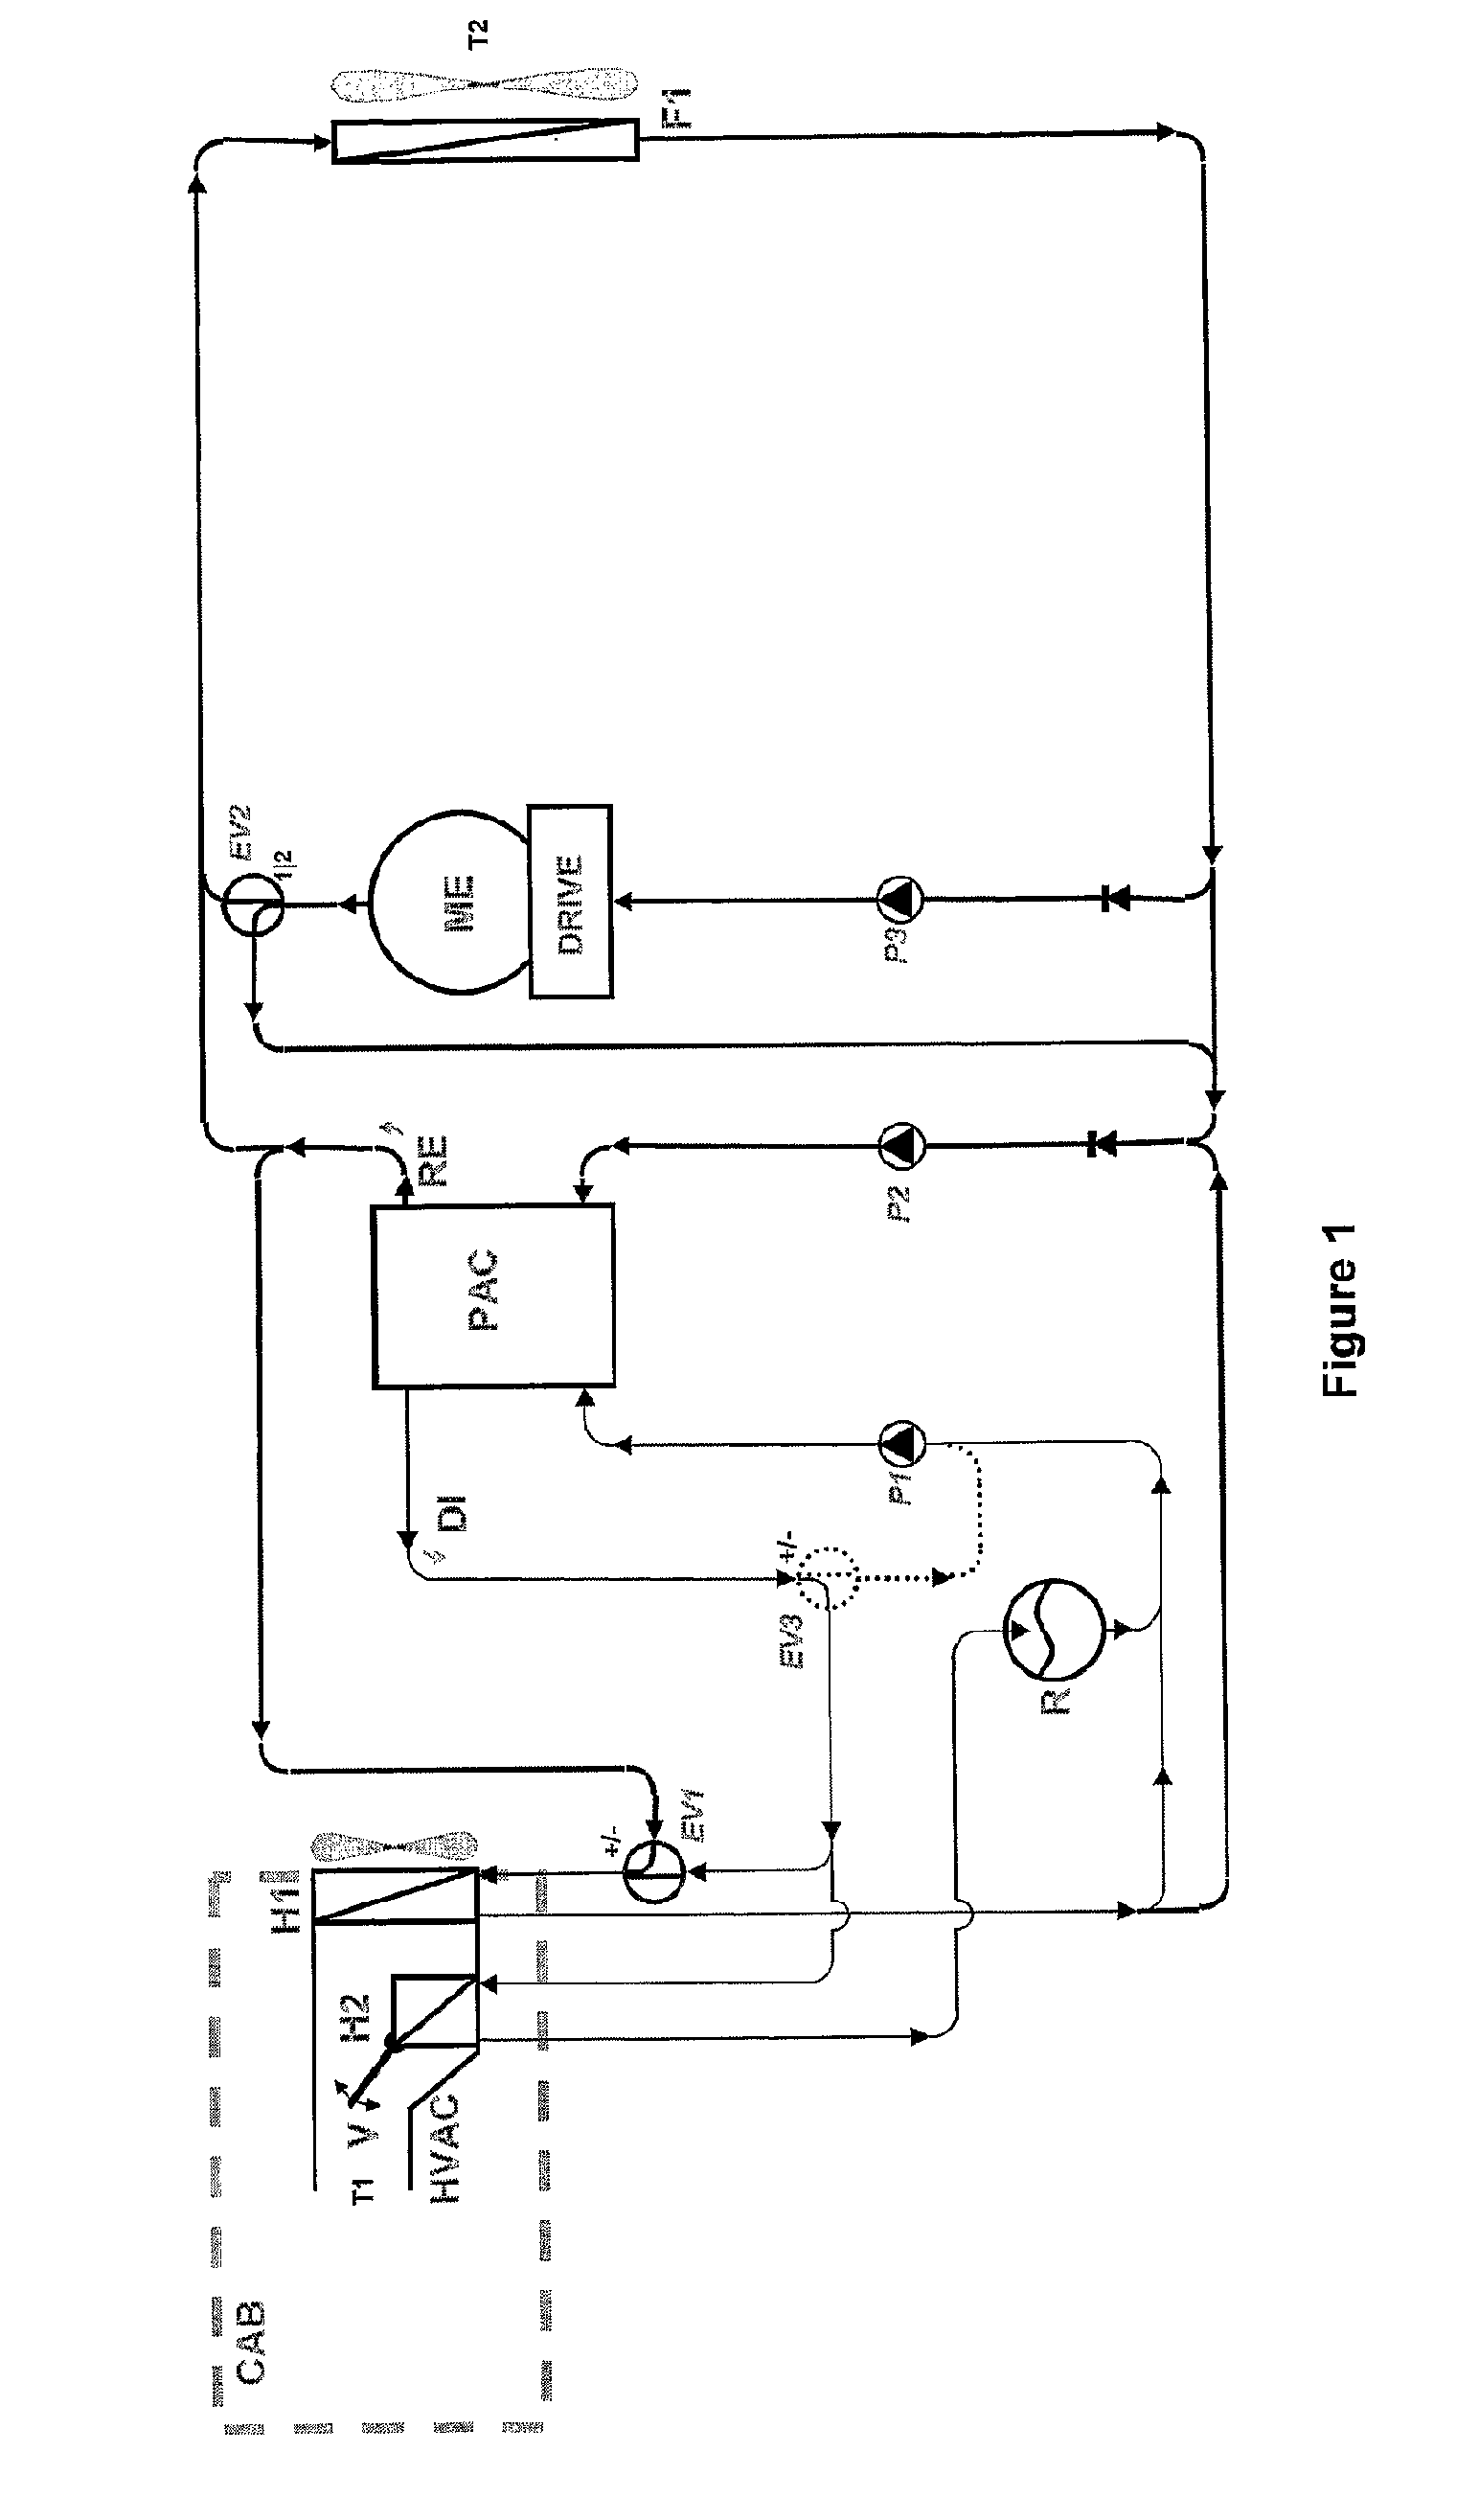 Electrical or hybrid motor vehicle with thermal conditioning system upgrading low-level sources